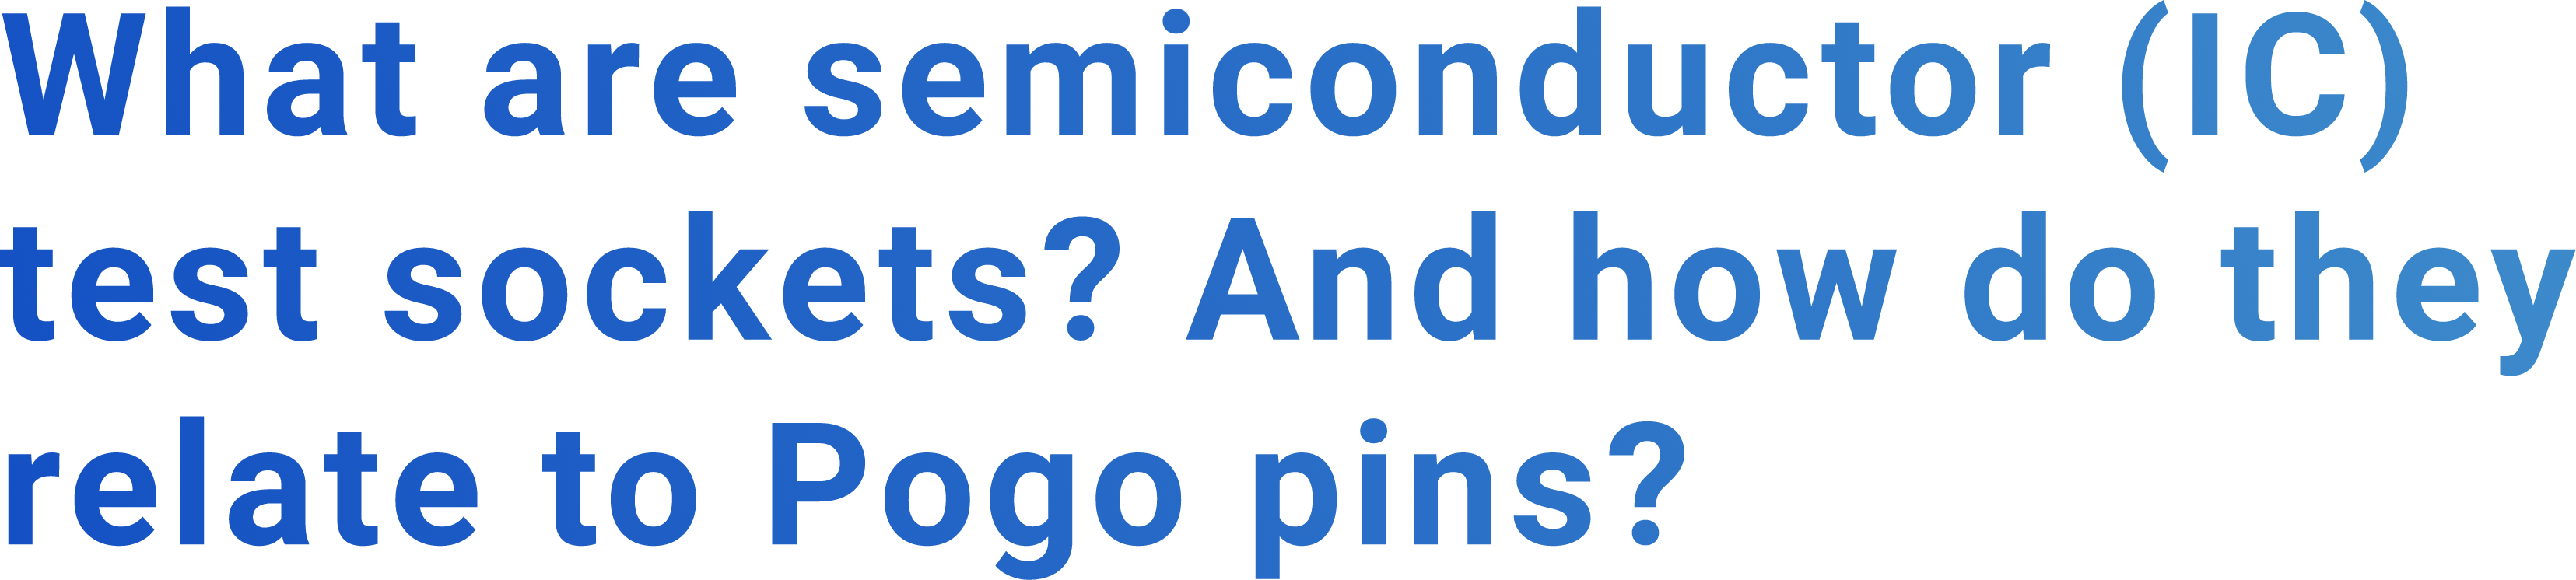 What are semiconductor (IC) test sockets? And how do they relate to Pogo pins?